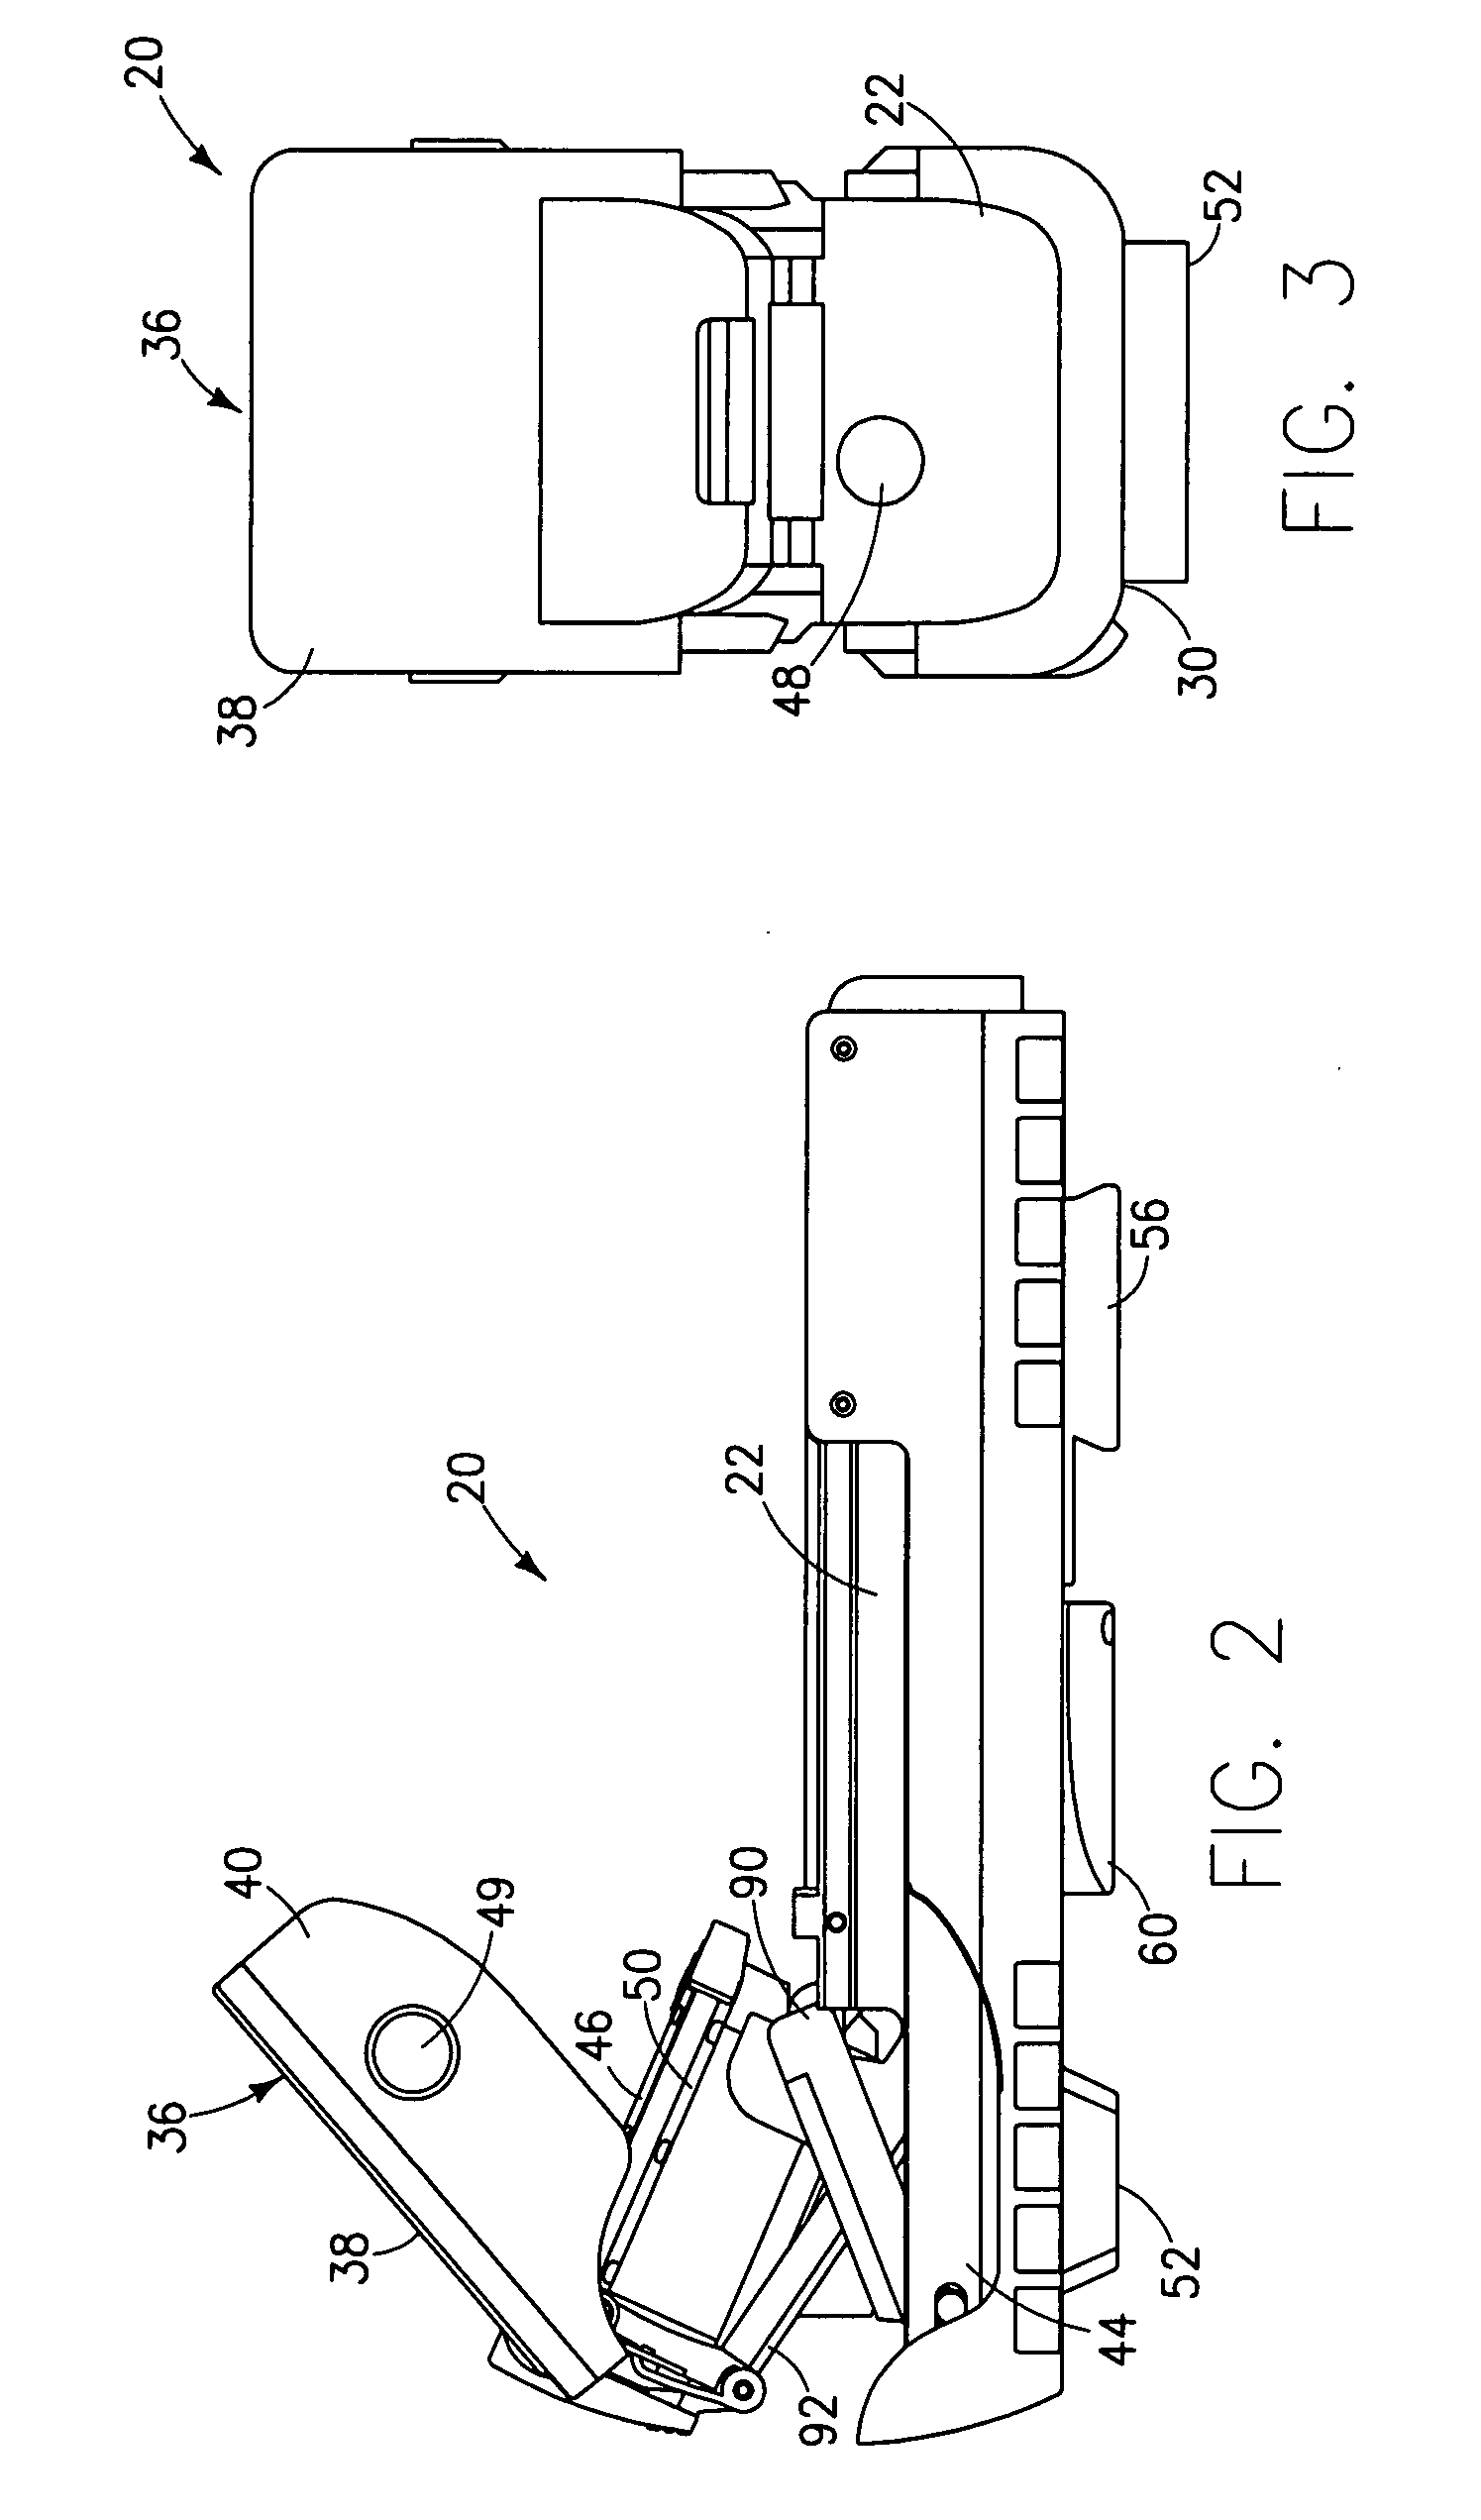 Method and apparatus for locating and measuring the distance to a target